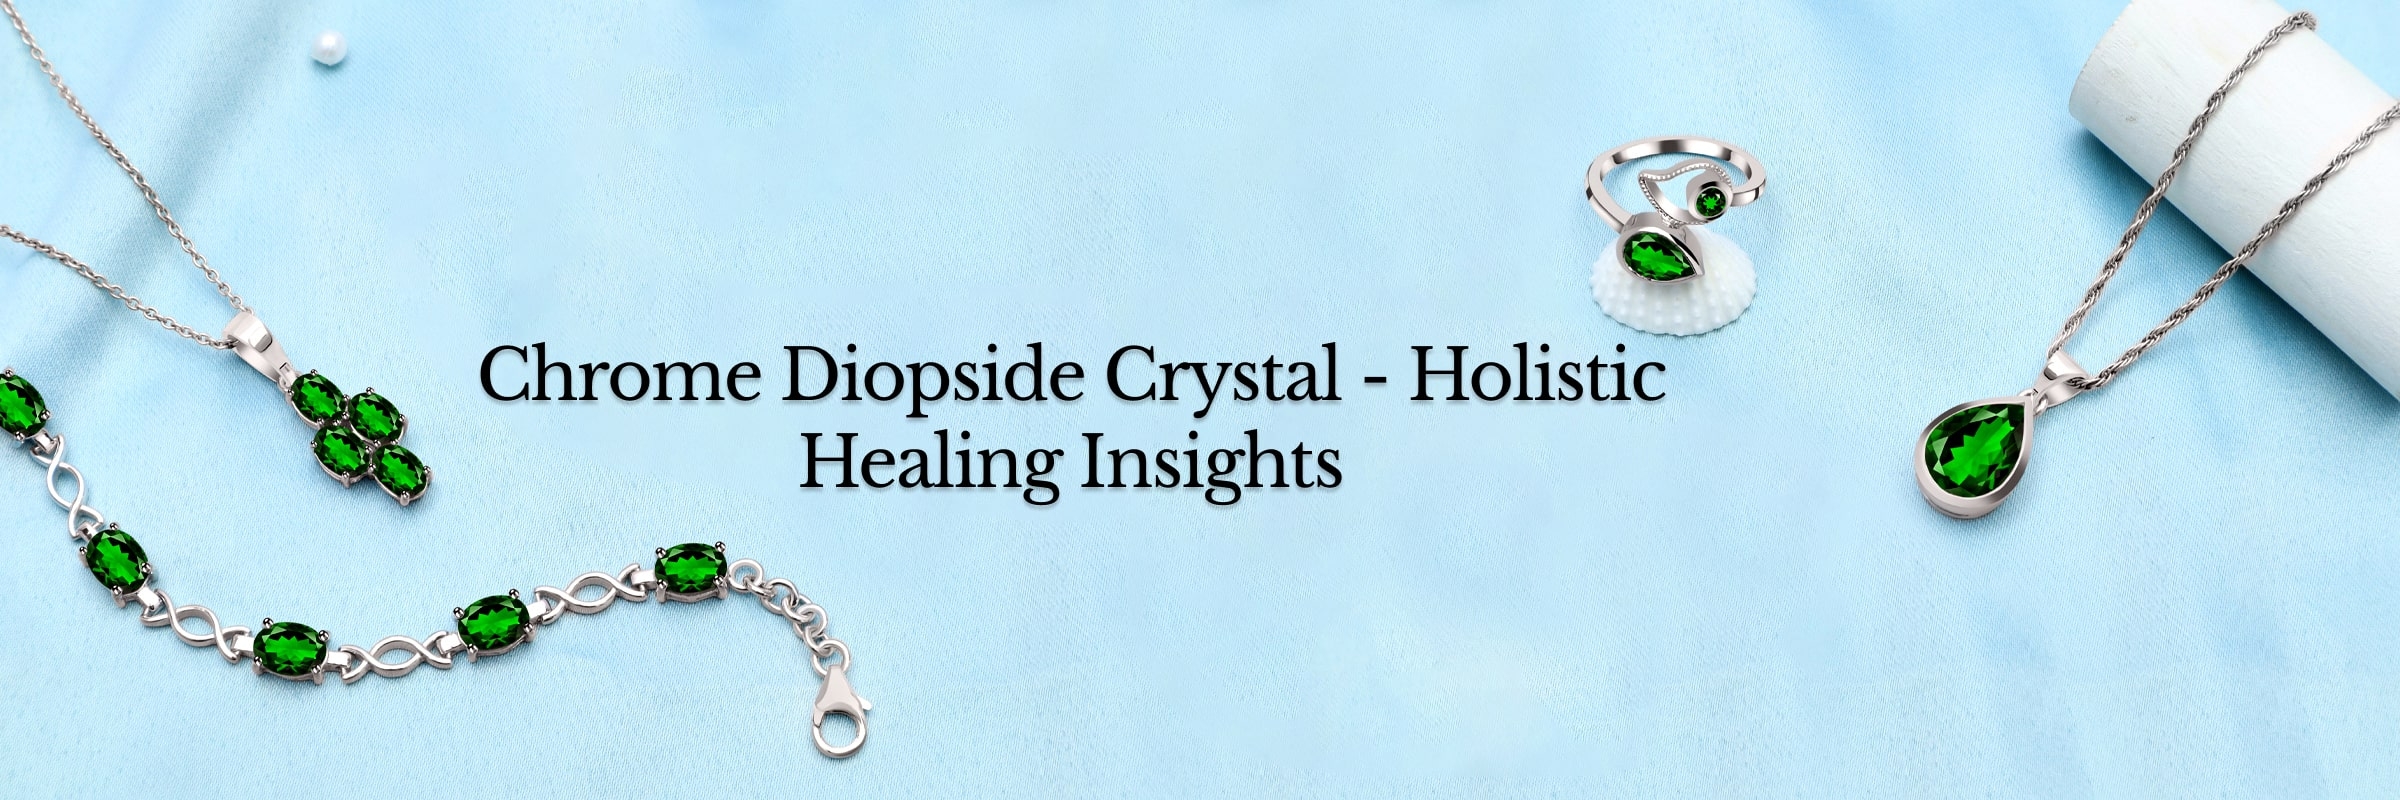 Healing Properties of Chrome Diopside Crystal